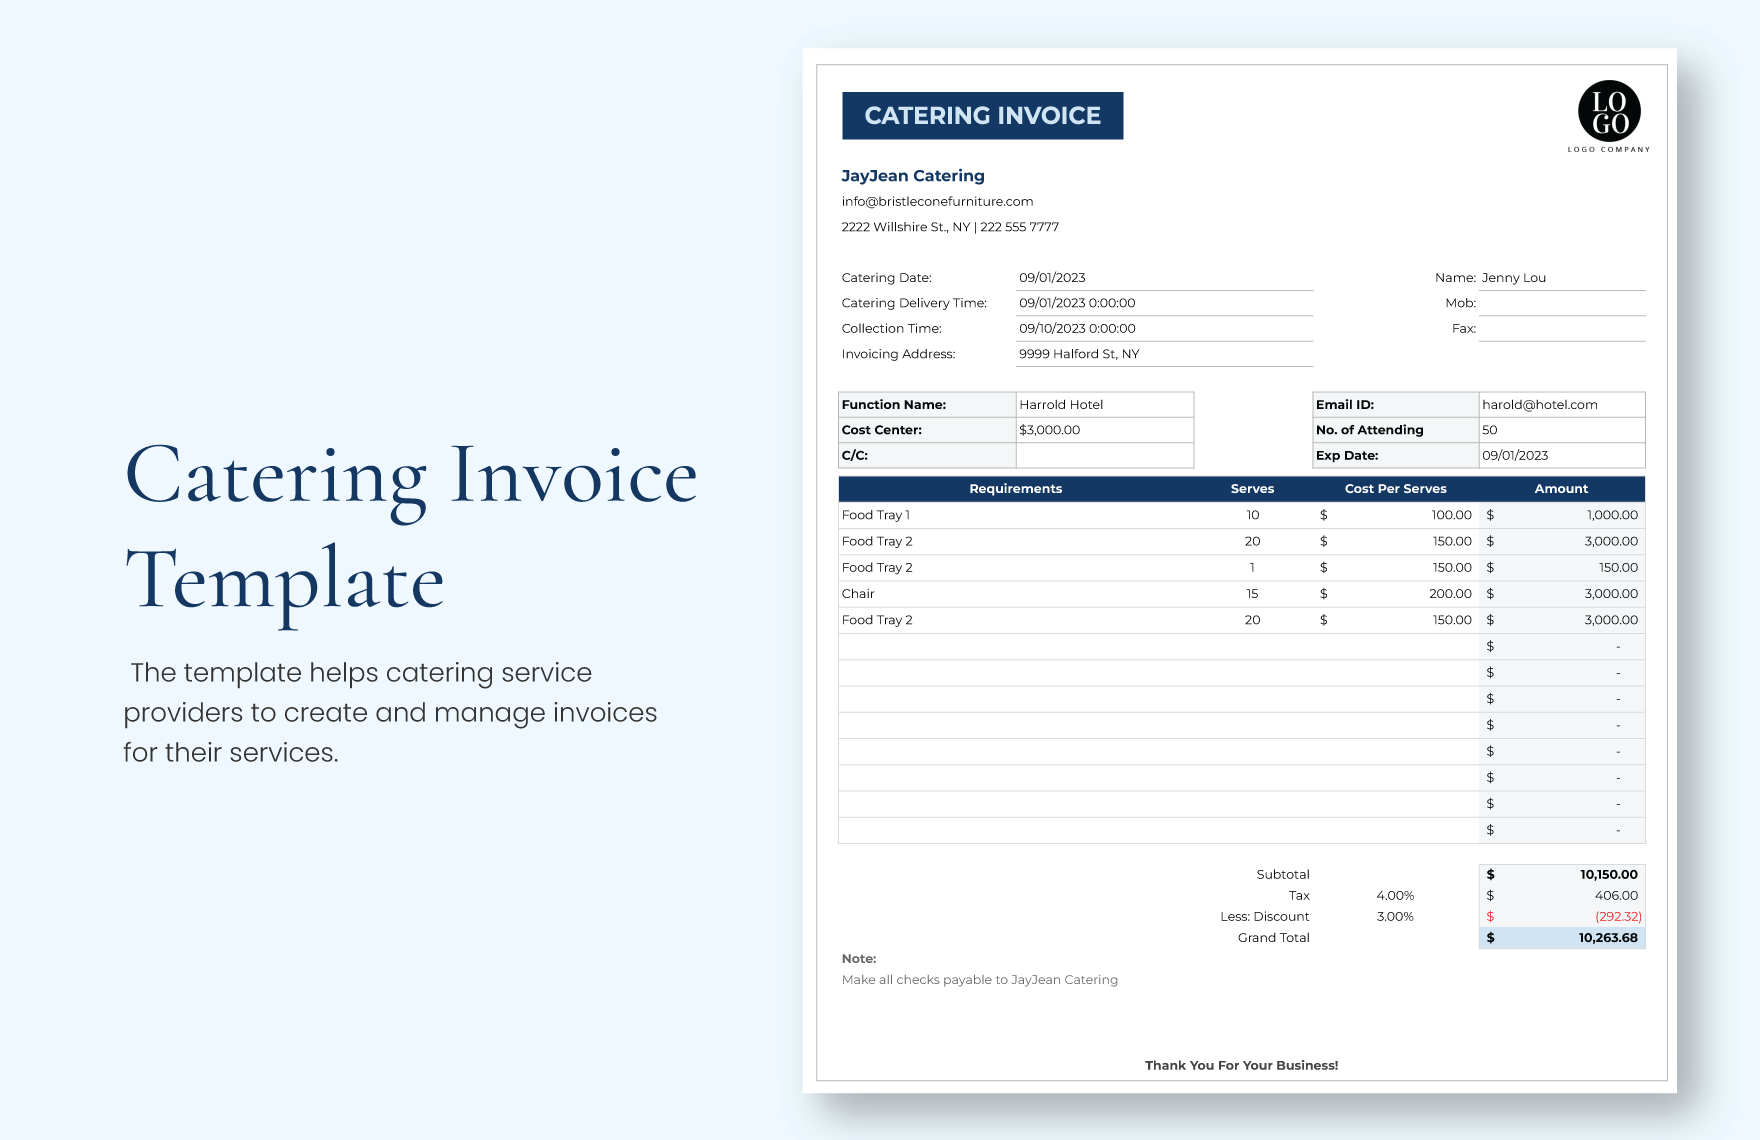 Catering Invoice Template Download in Word, Google Docs, Excel, PDF